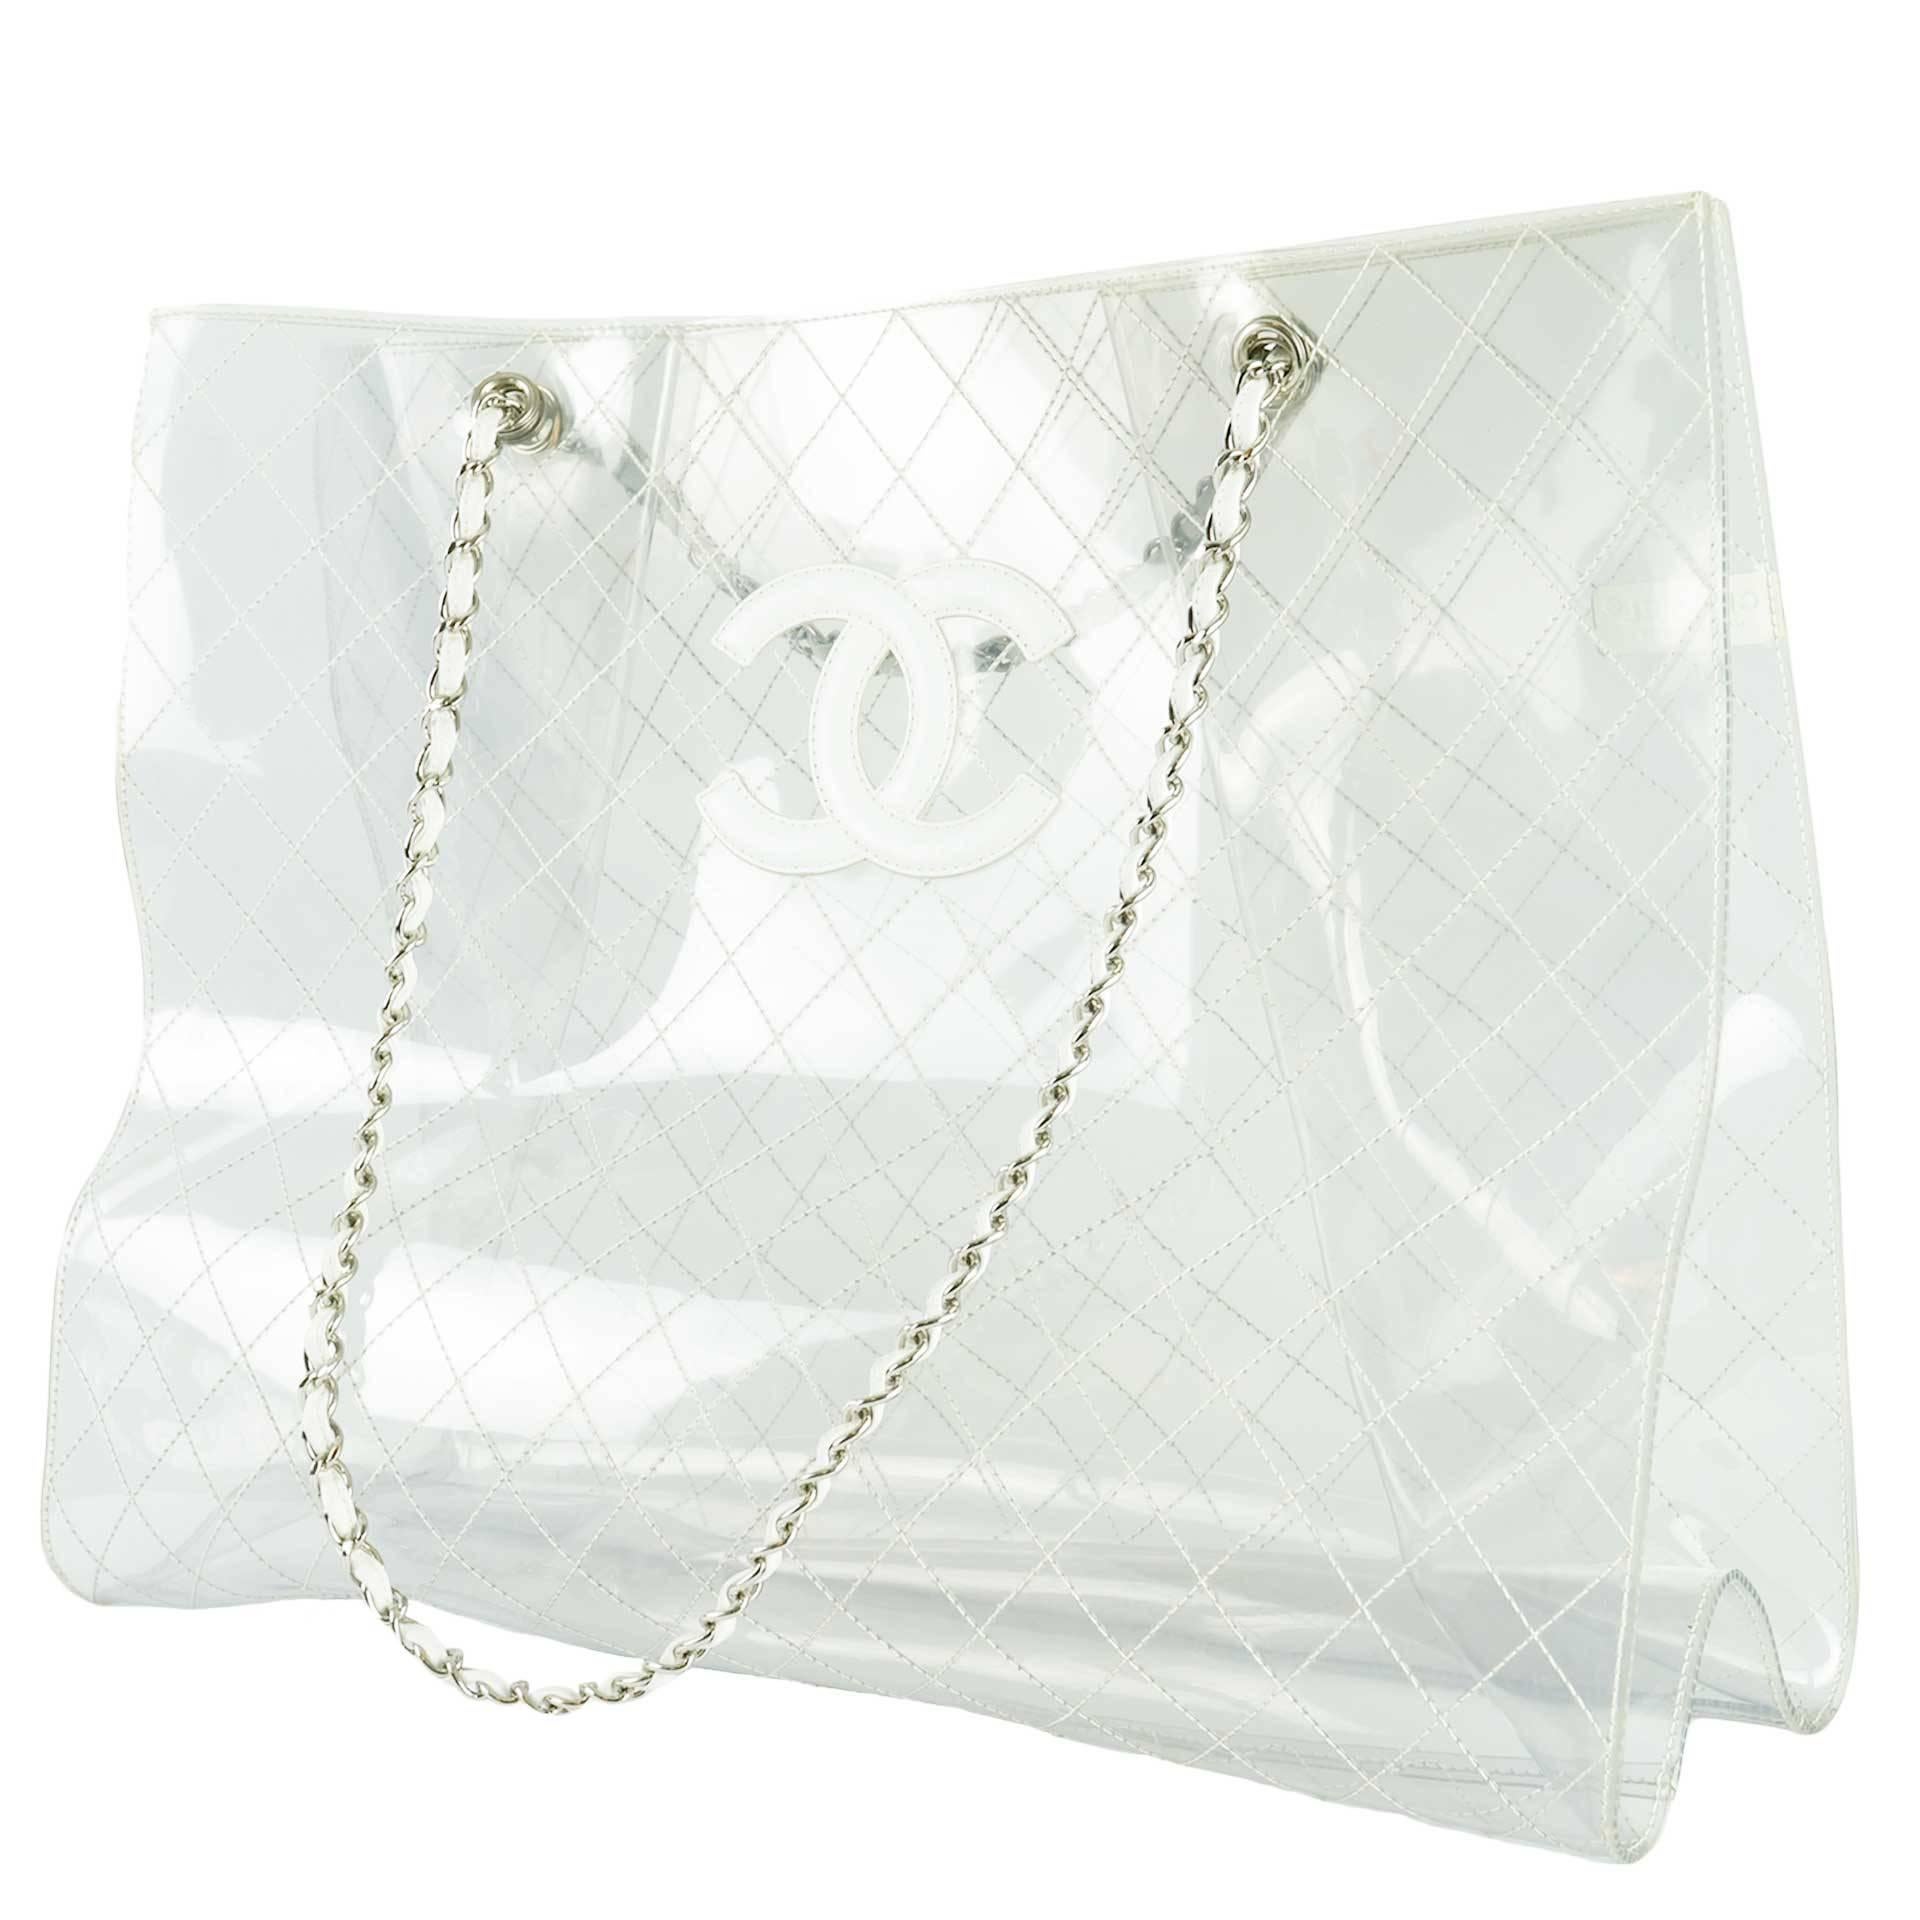 chanel clear tote